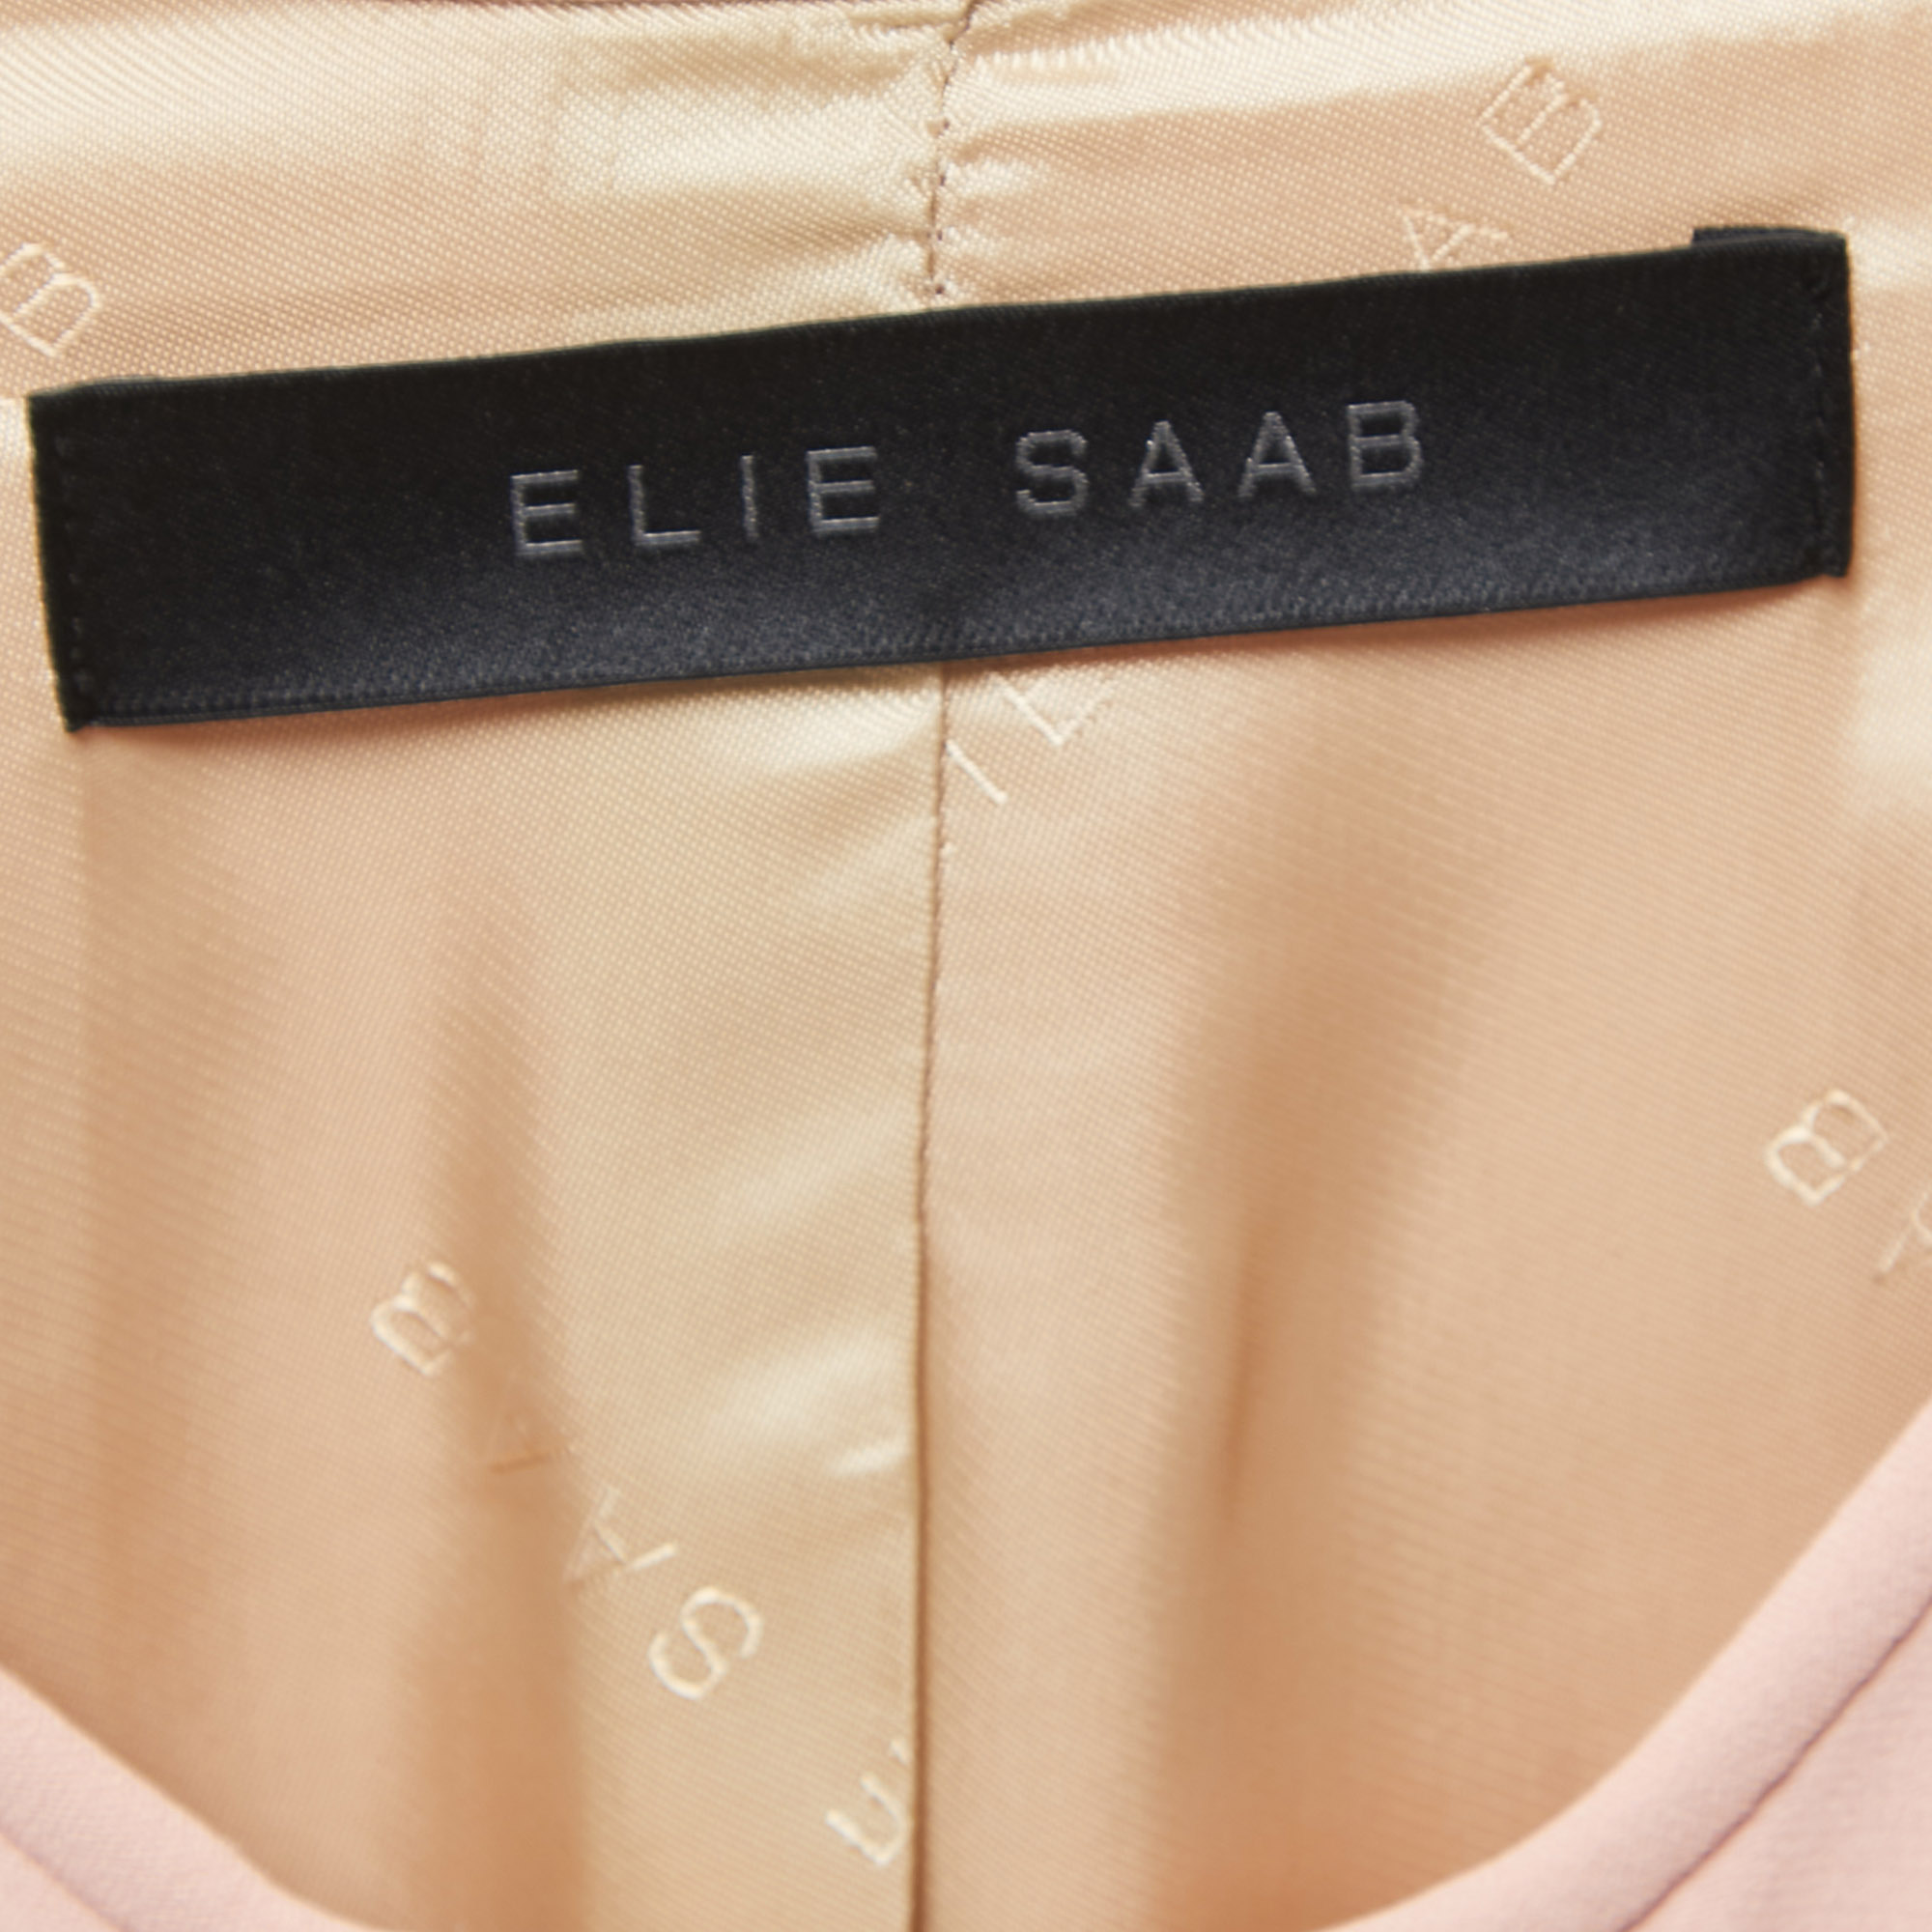 Elie Saab Dusty Pink Crepe Lace Trimmed Zip Front Full Sleeve Top S